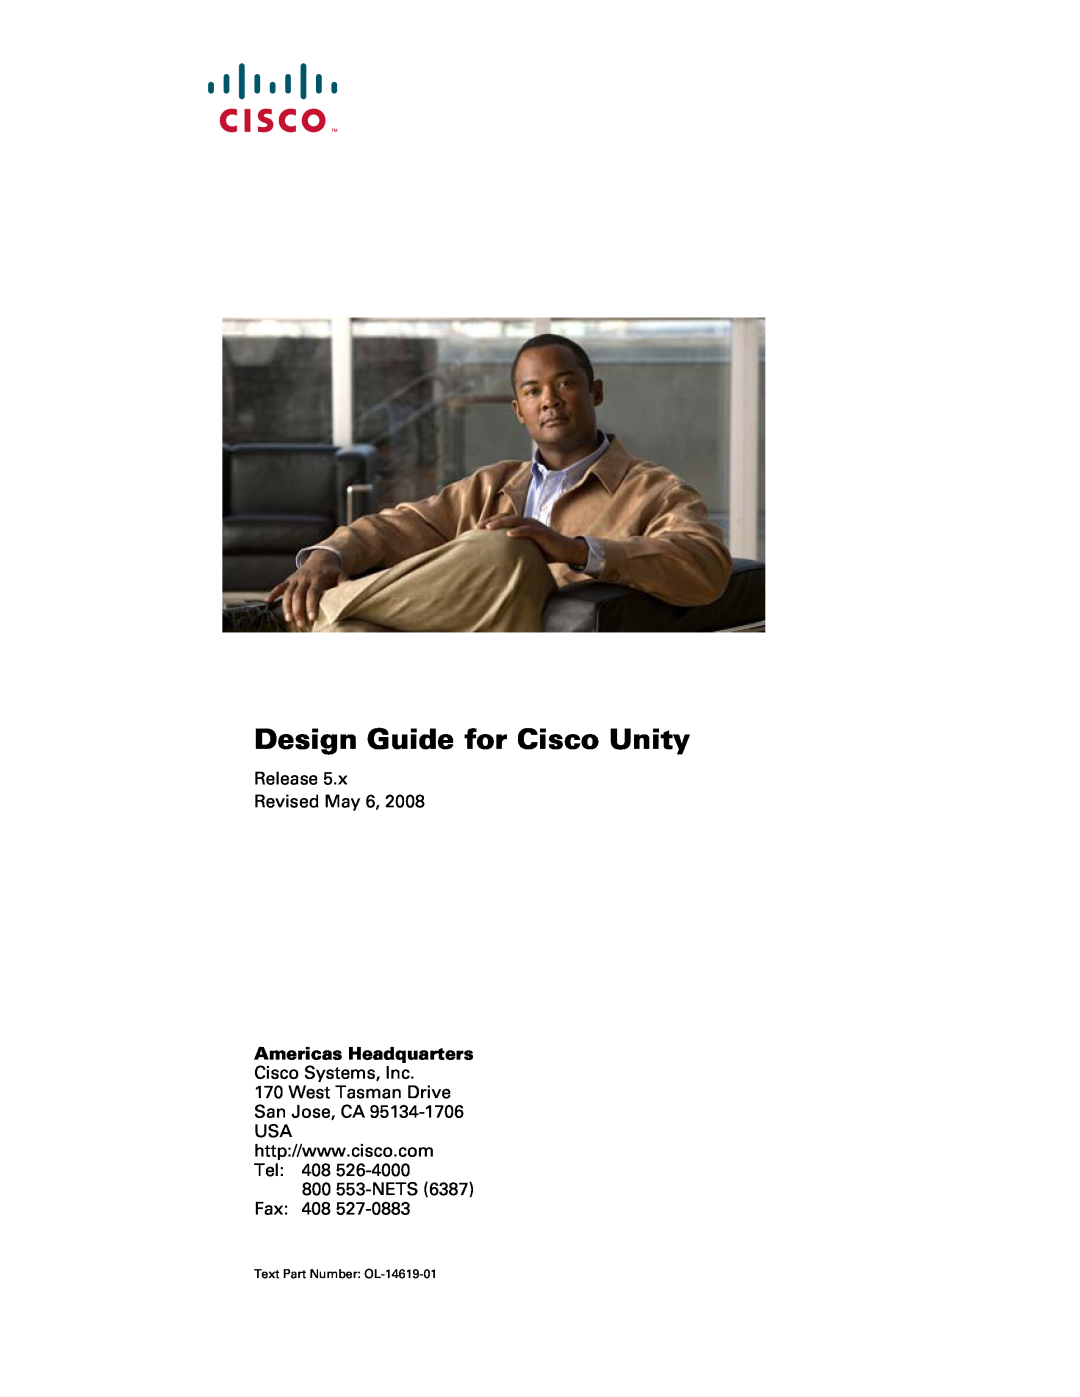 Cisco Systems OL-14619-01 manual Americas Headquarters, Design Guide for Cisco Unity, Release Revised May 6 